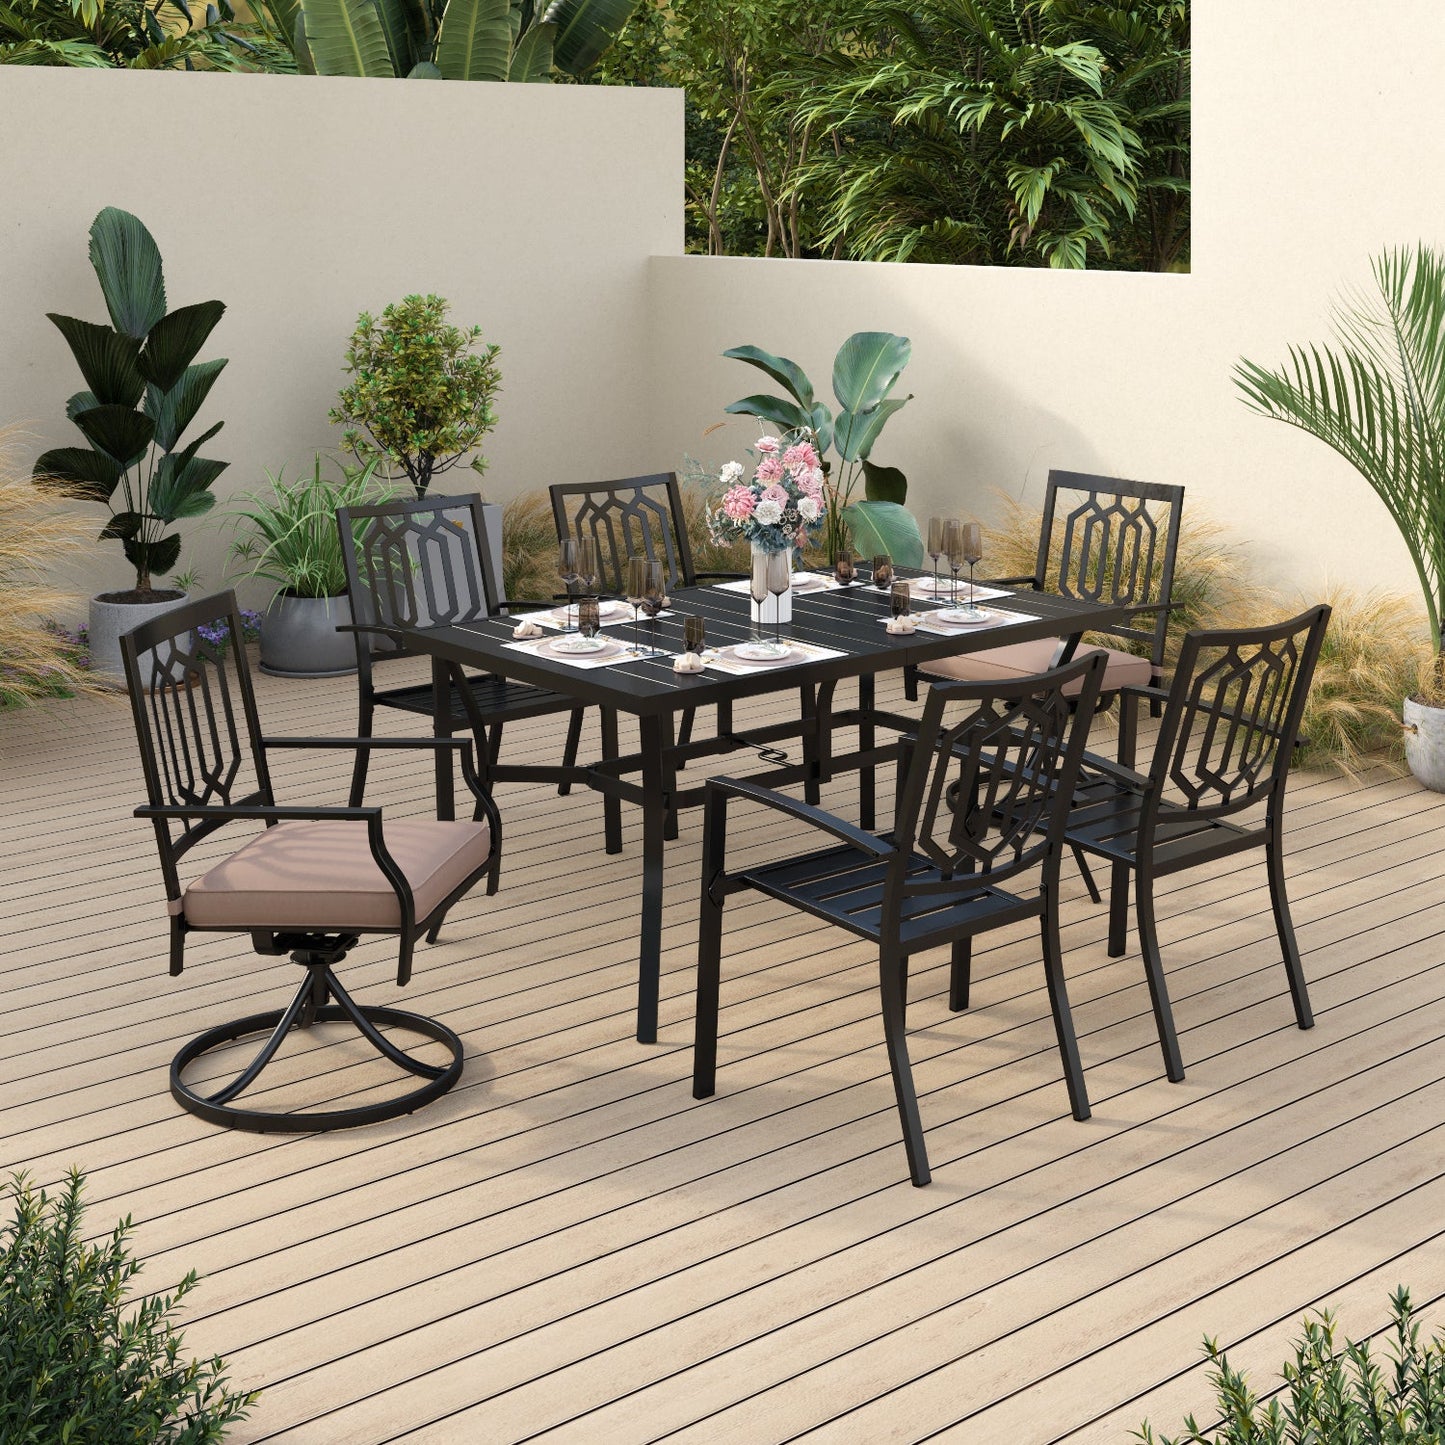 Sophia & William 7 Piece Outdoor Patio Dining Bistro Set with 5 Metal Stackable Chairs&1 Swivel Dining Chair and 1 Piece Rectangular Dining Table